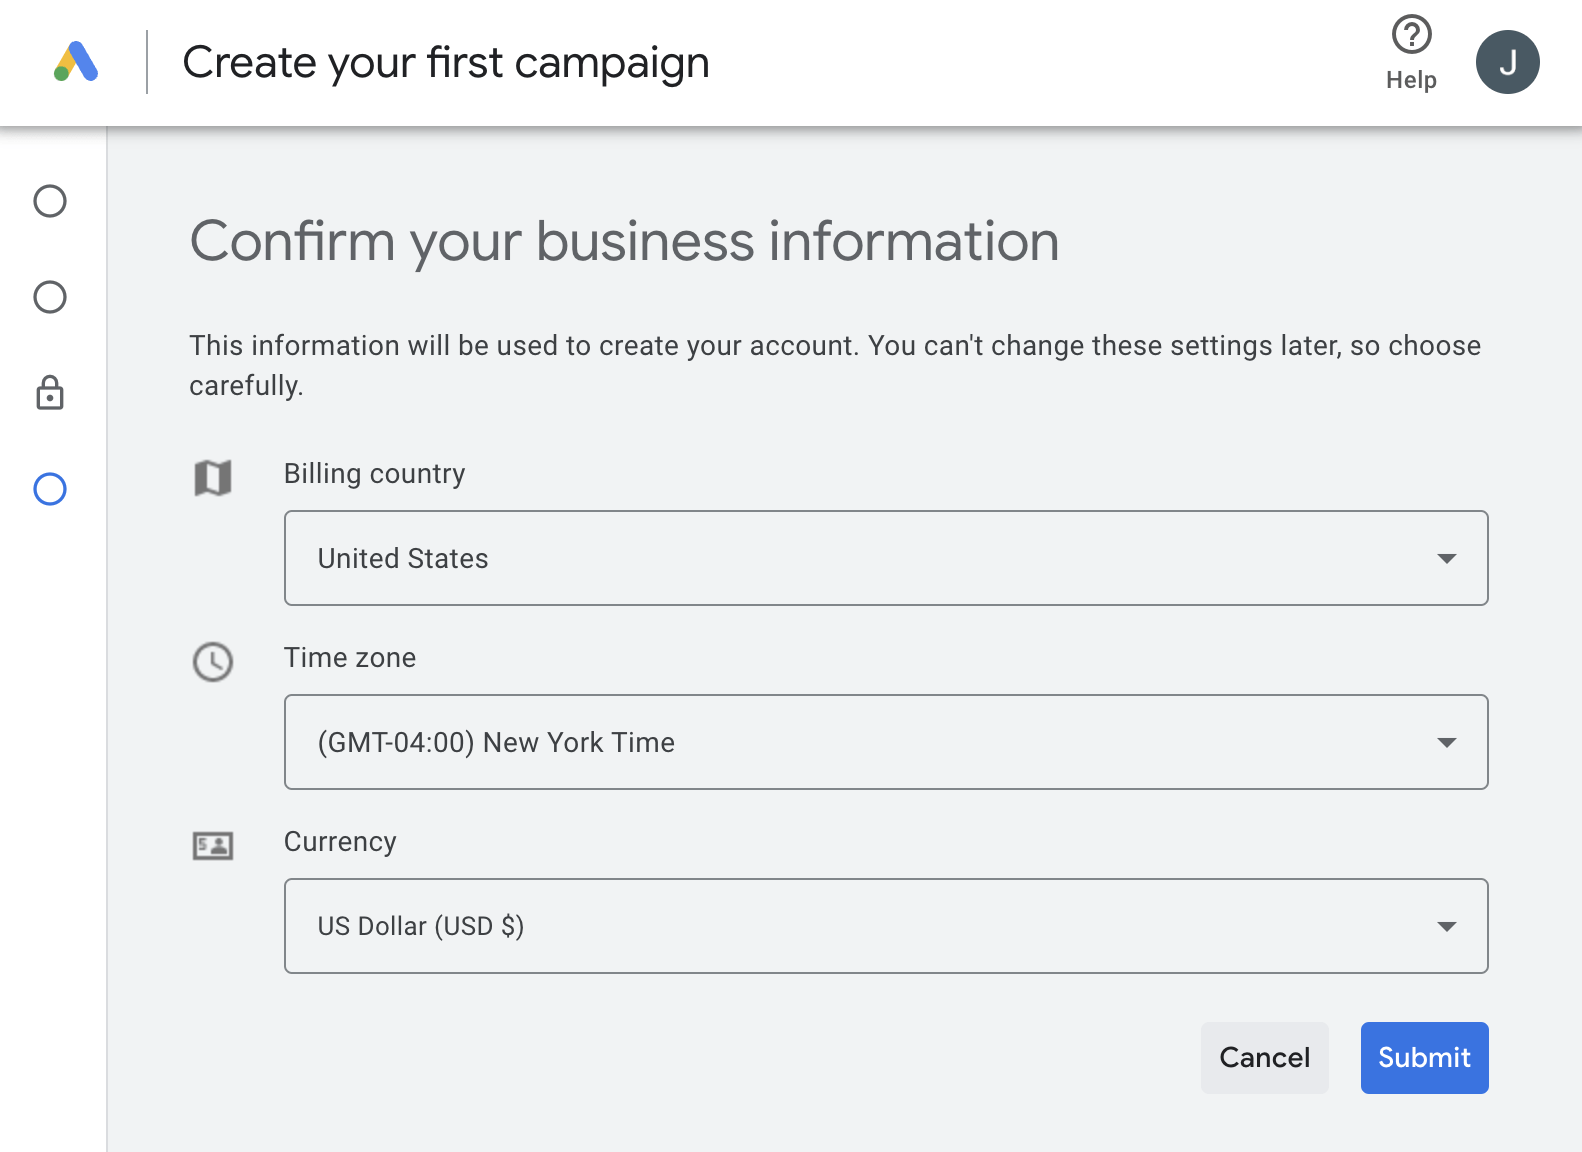 Confirming business information 